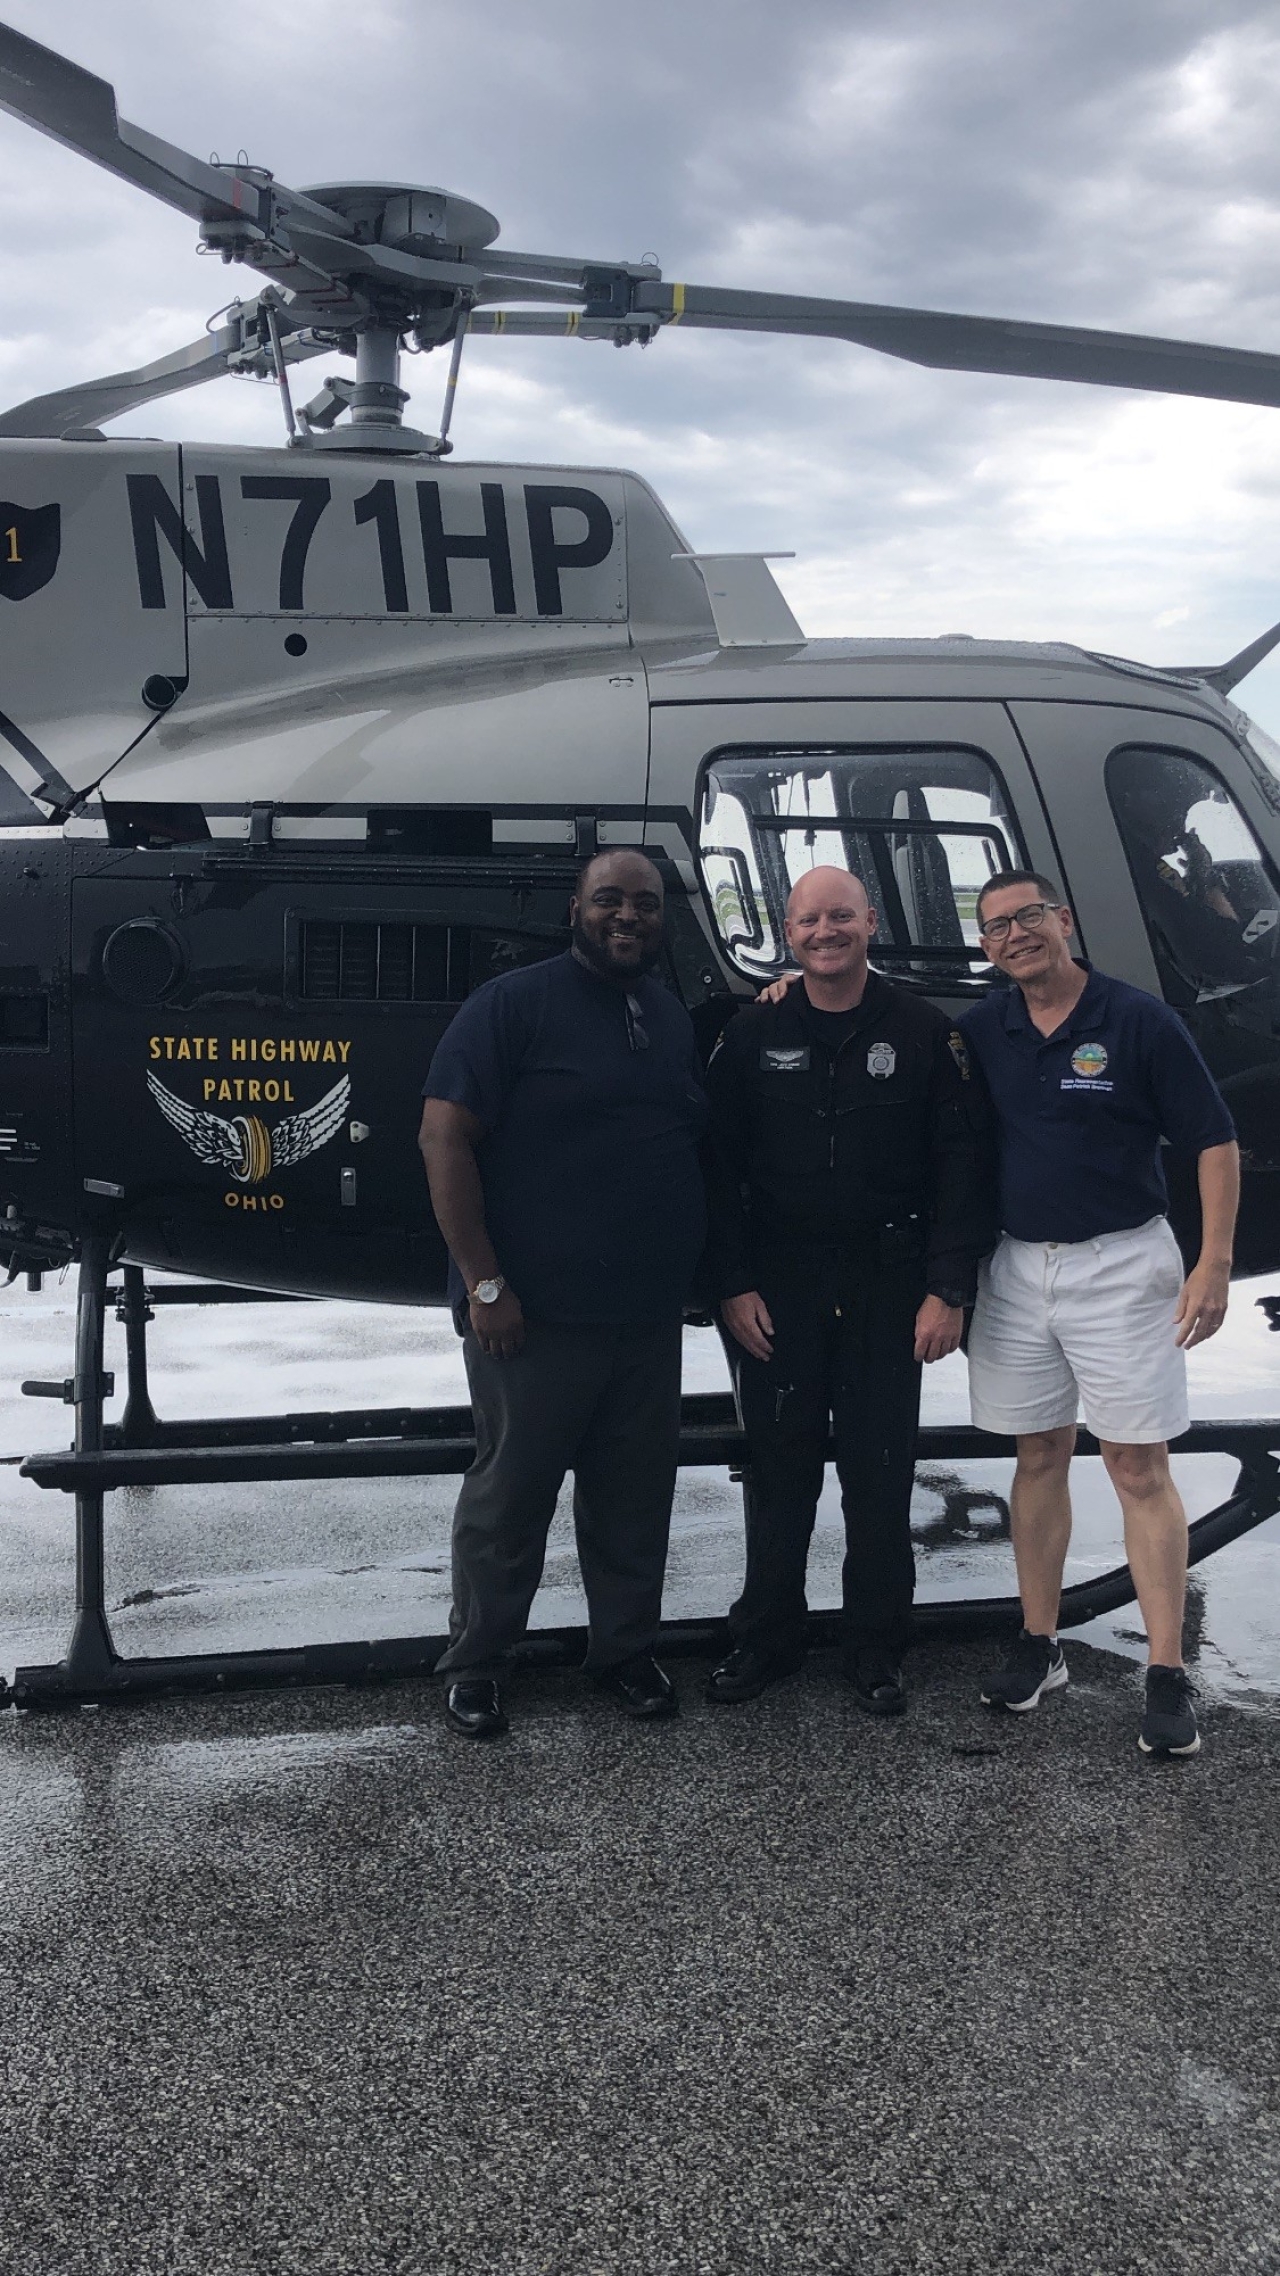 State Representatives Darnell Brewer and Sean Patrick Brennan with Ohio Highway Patrol Trooper Jeff Evans before their 8-hour helicoptor law-enforcement ride along.